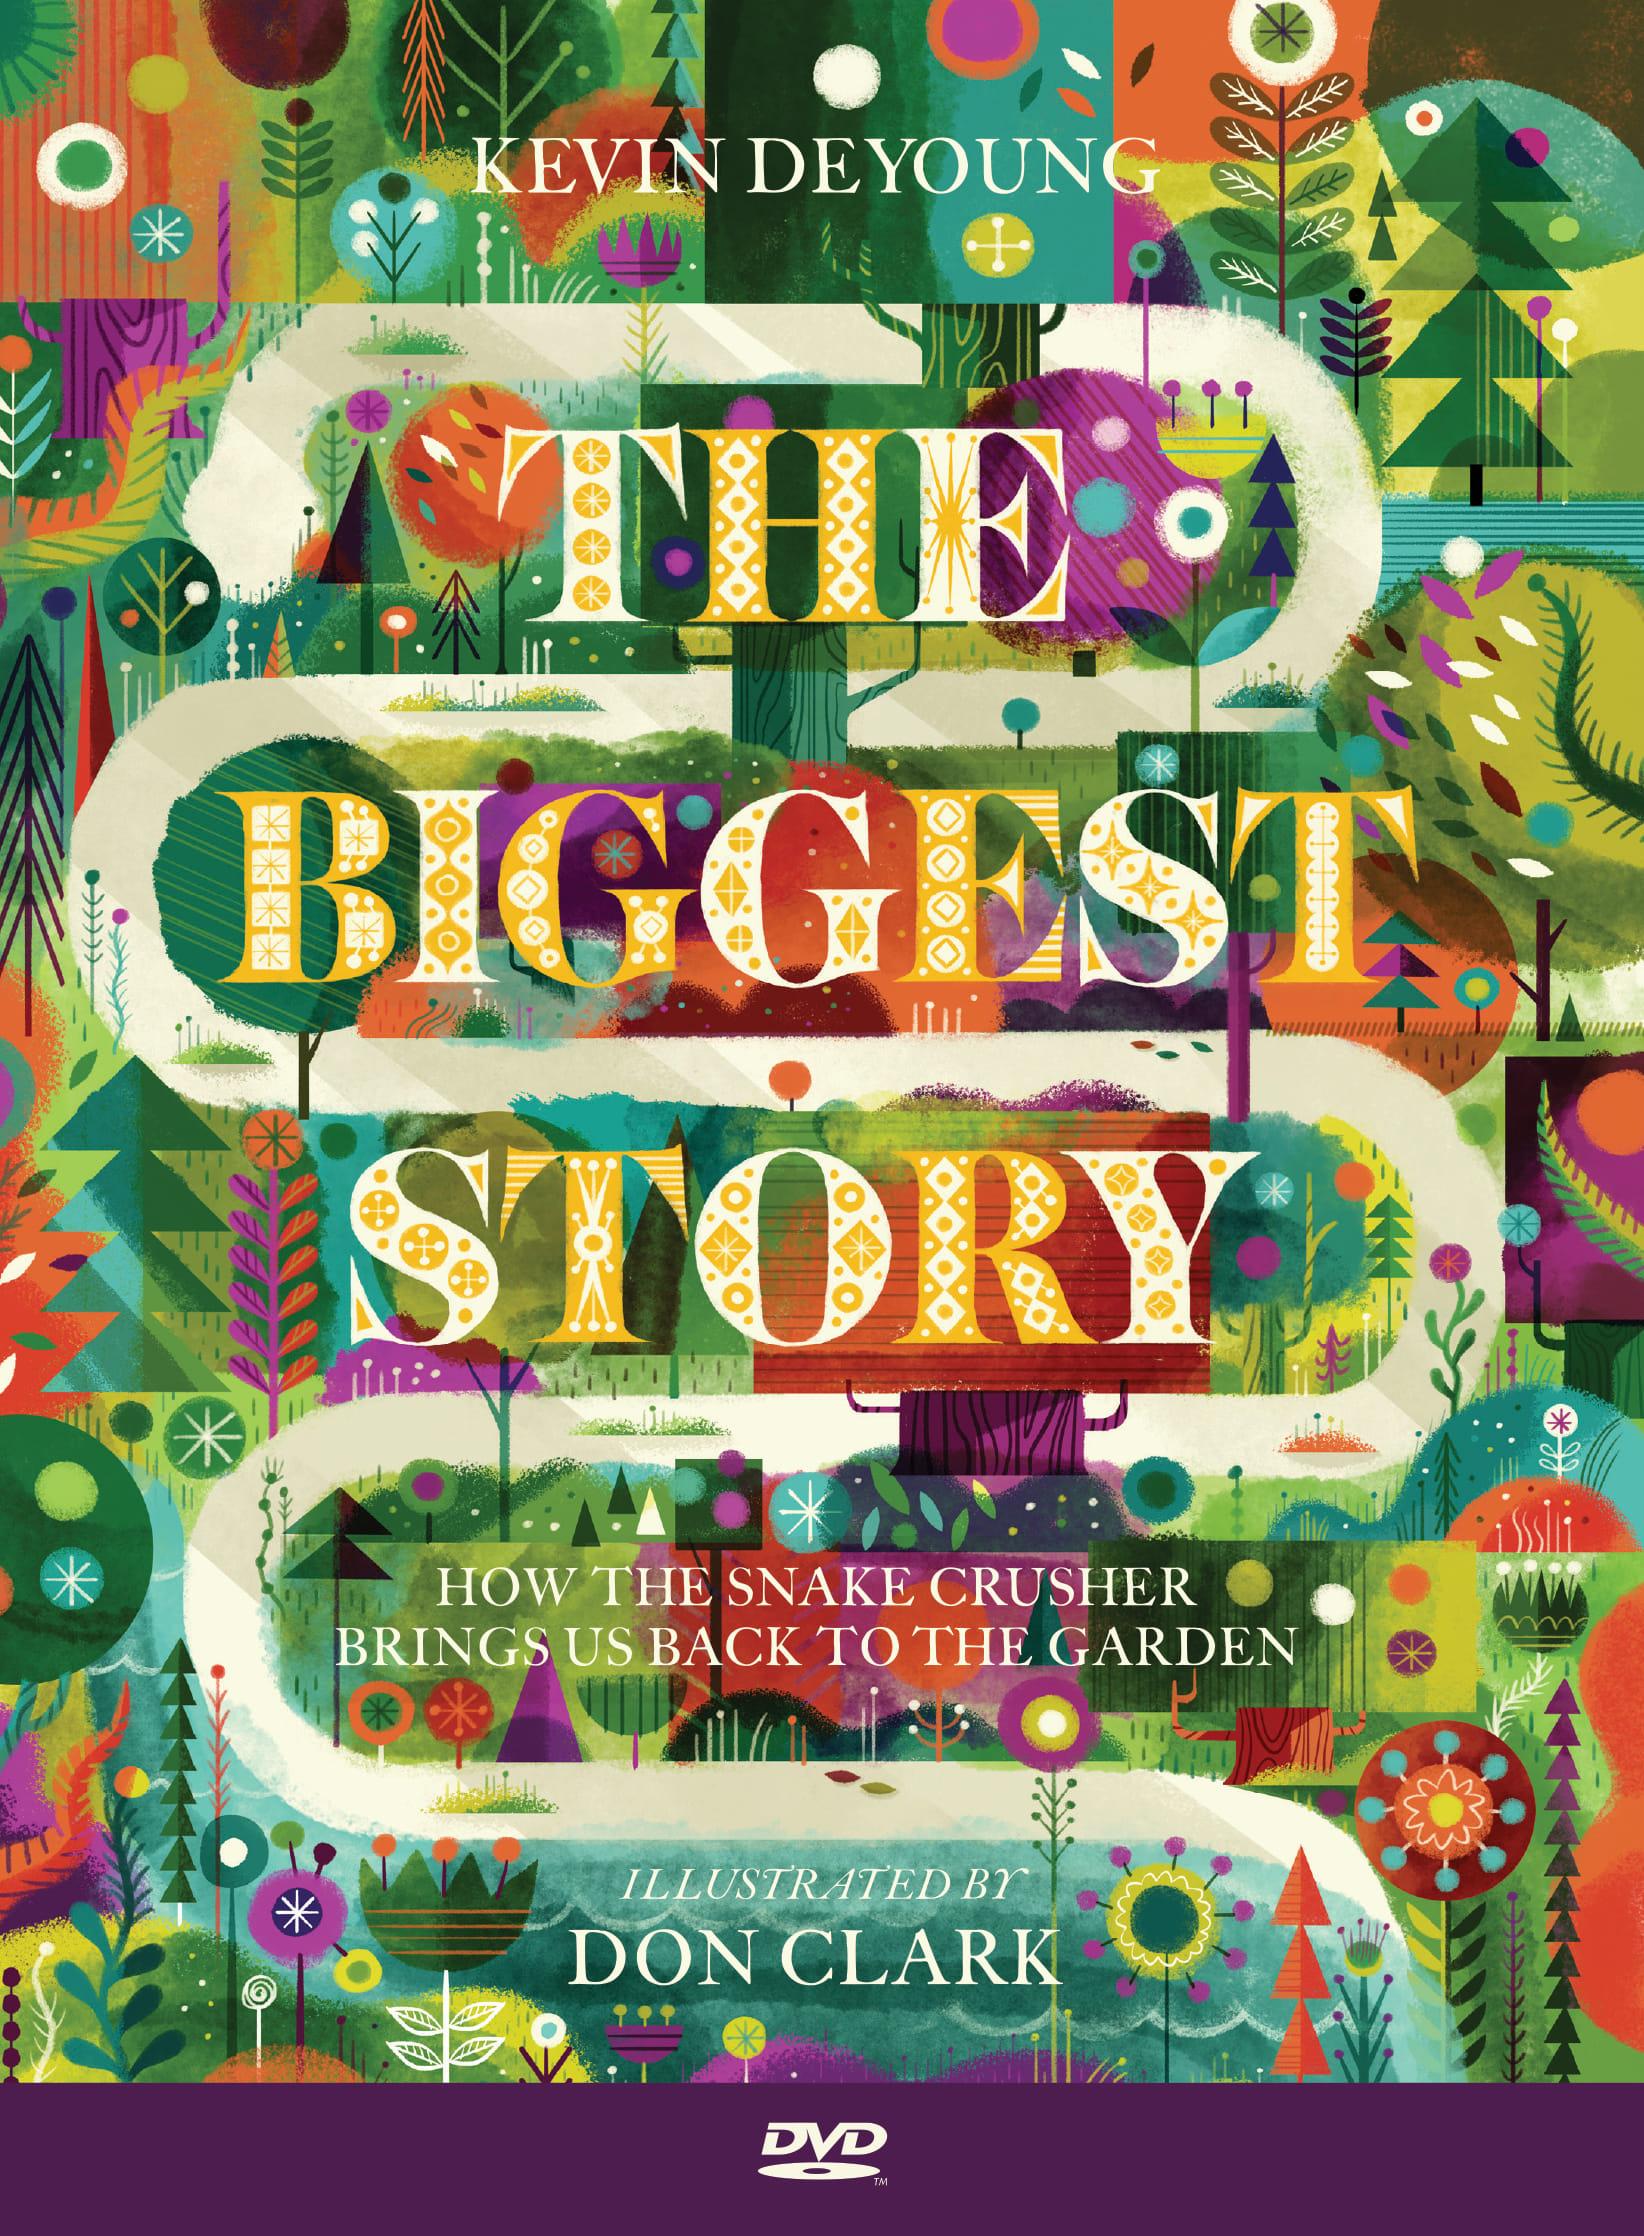 The Biggest Story poster